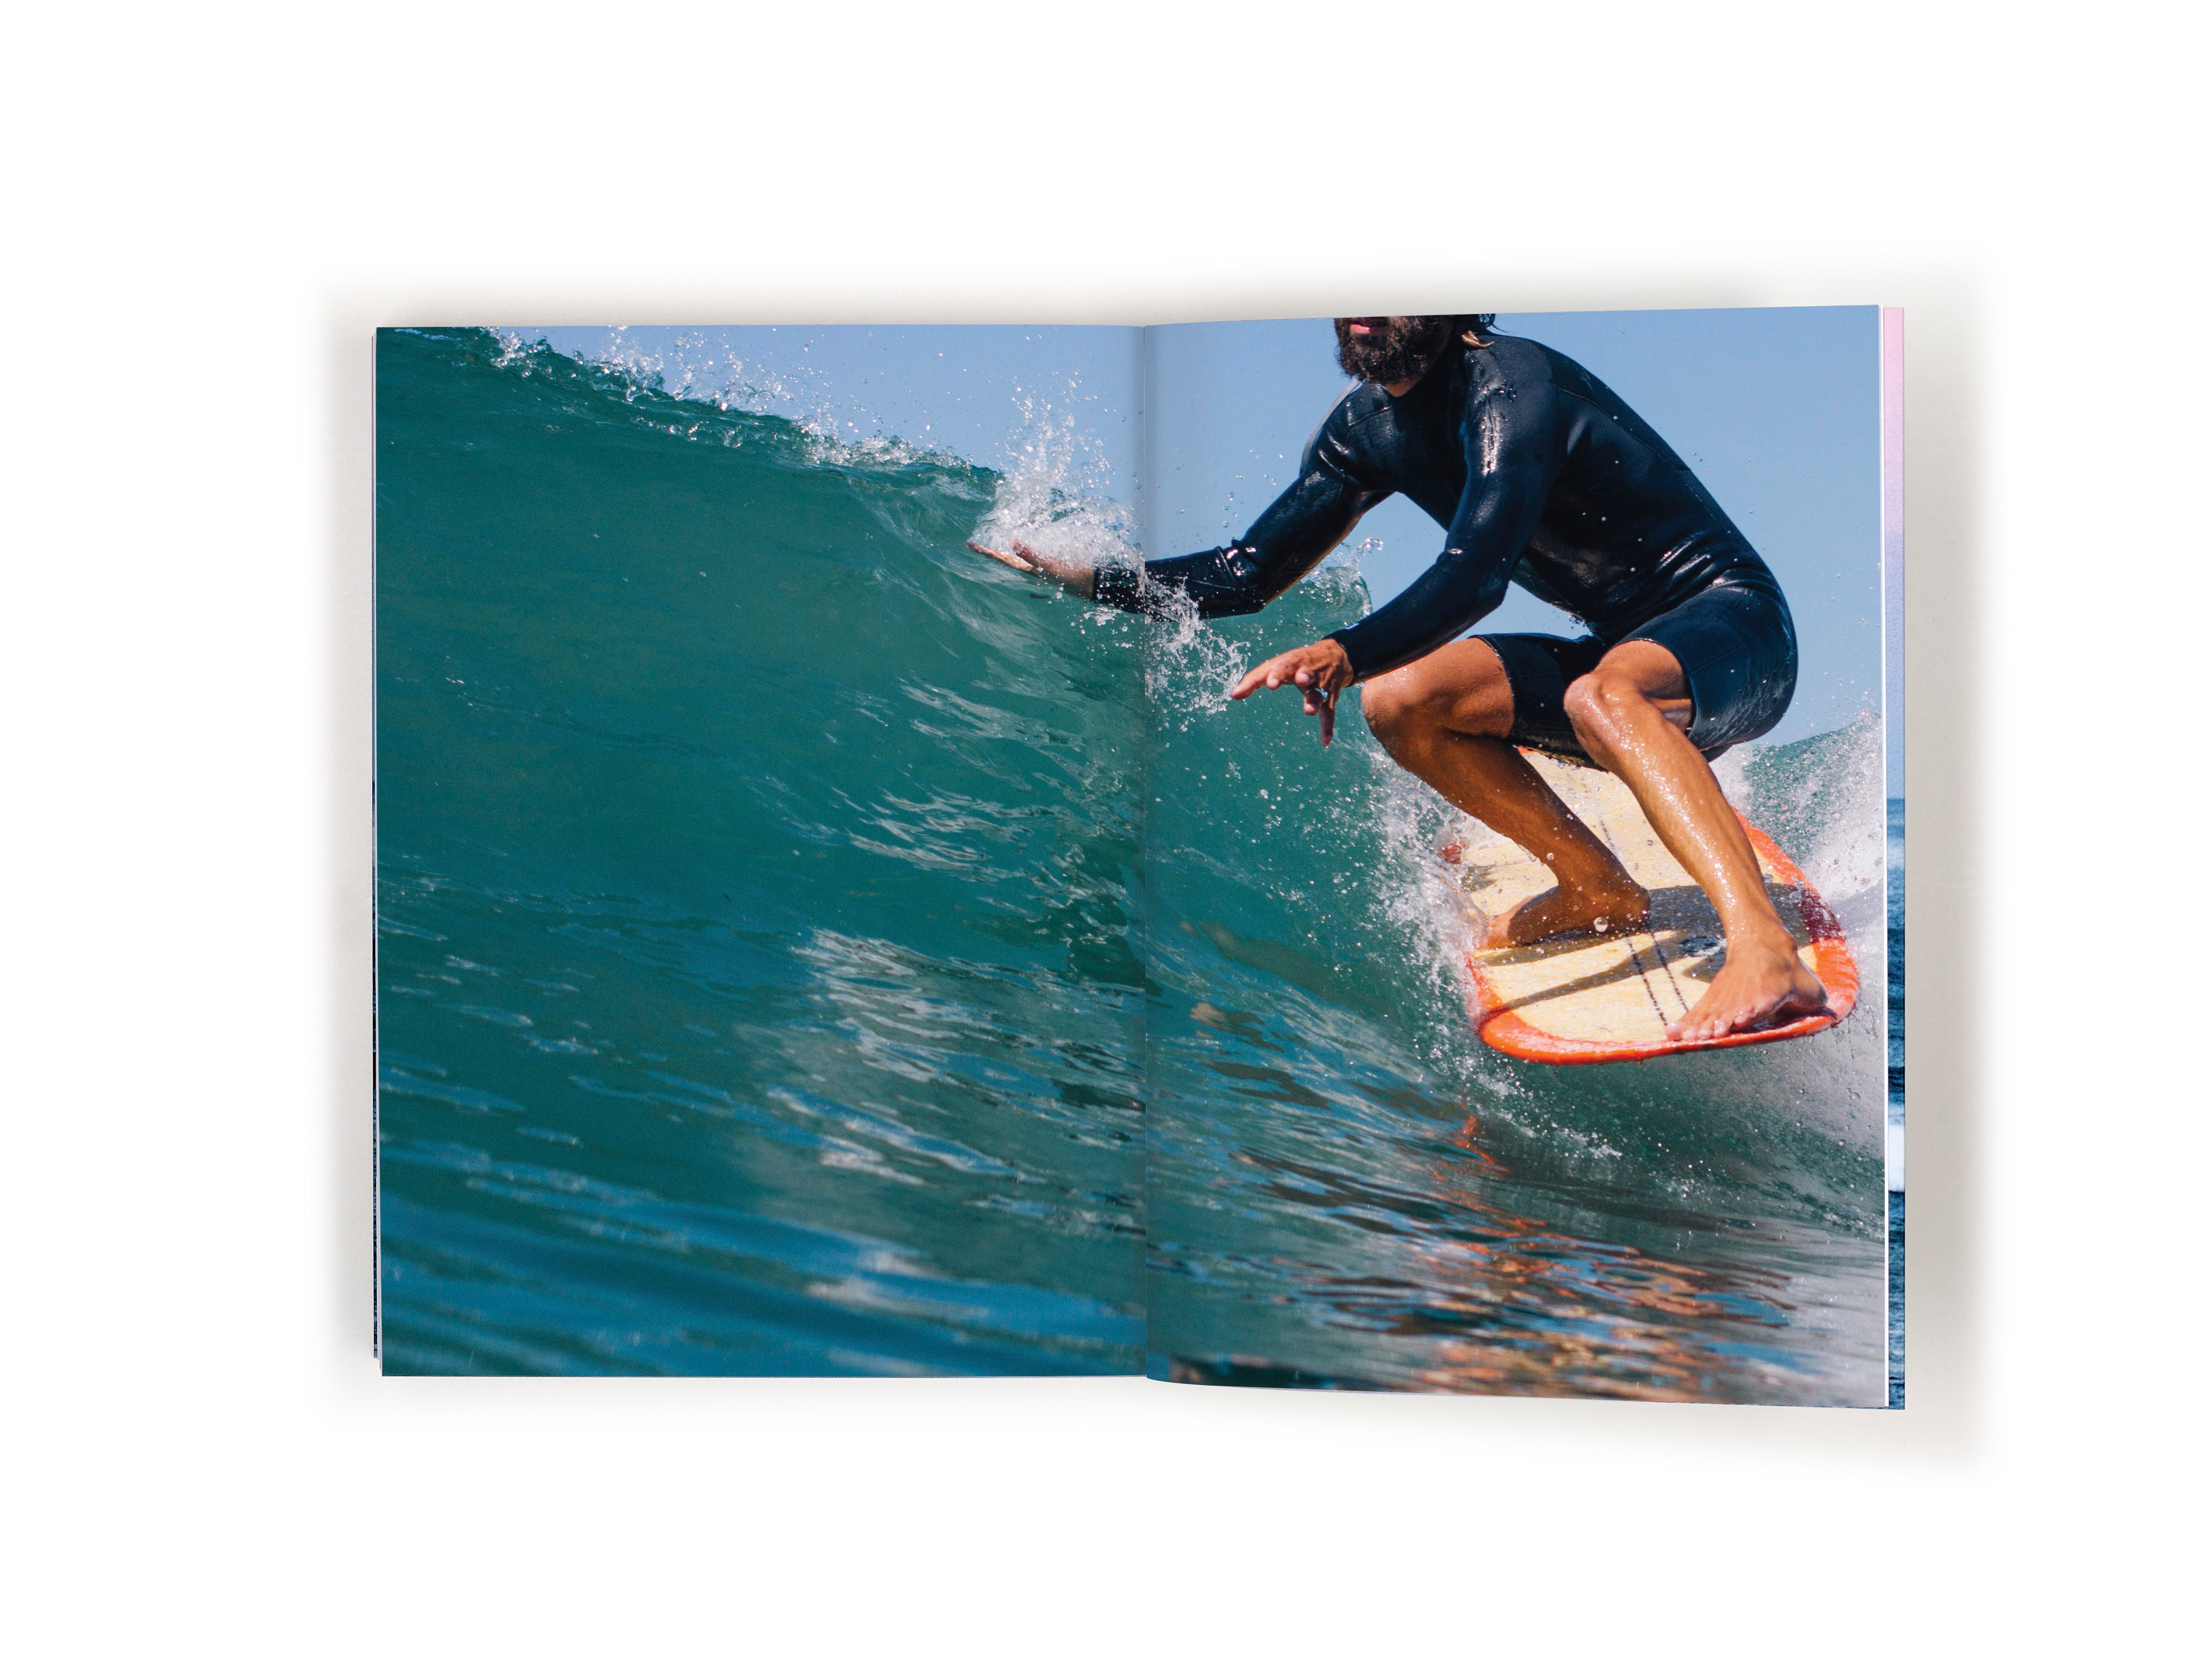 ILTS Surf & Travel Guide to Southwest Europe